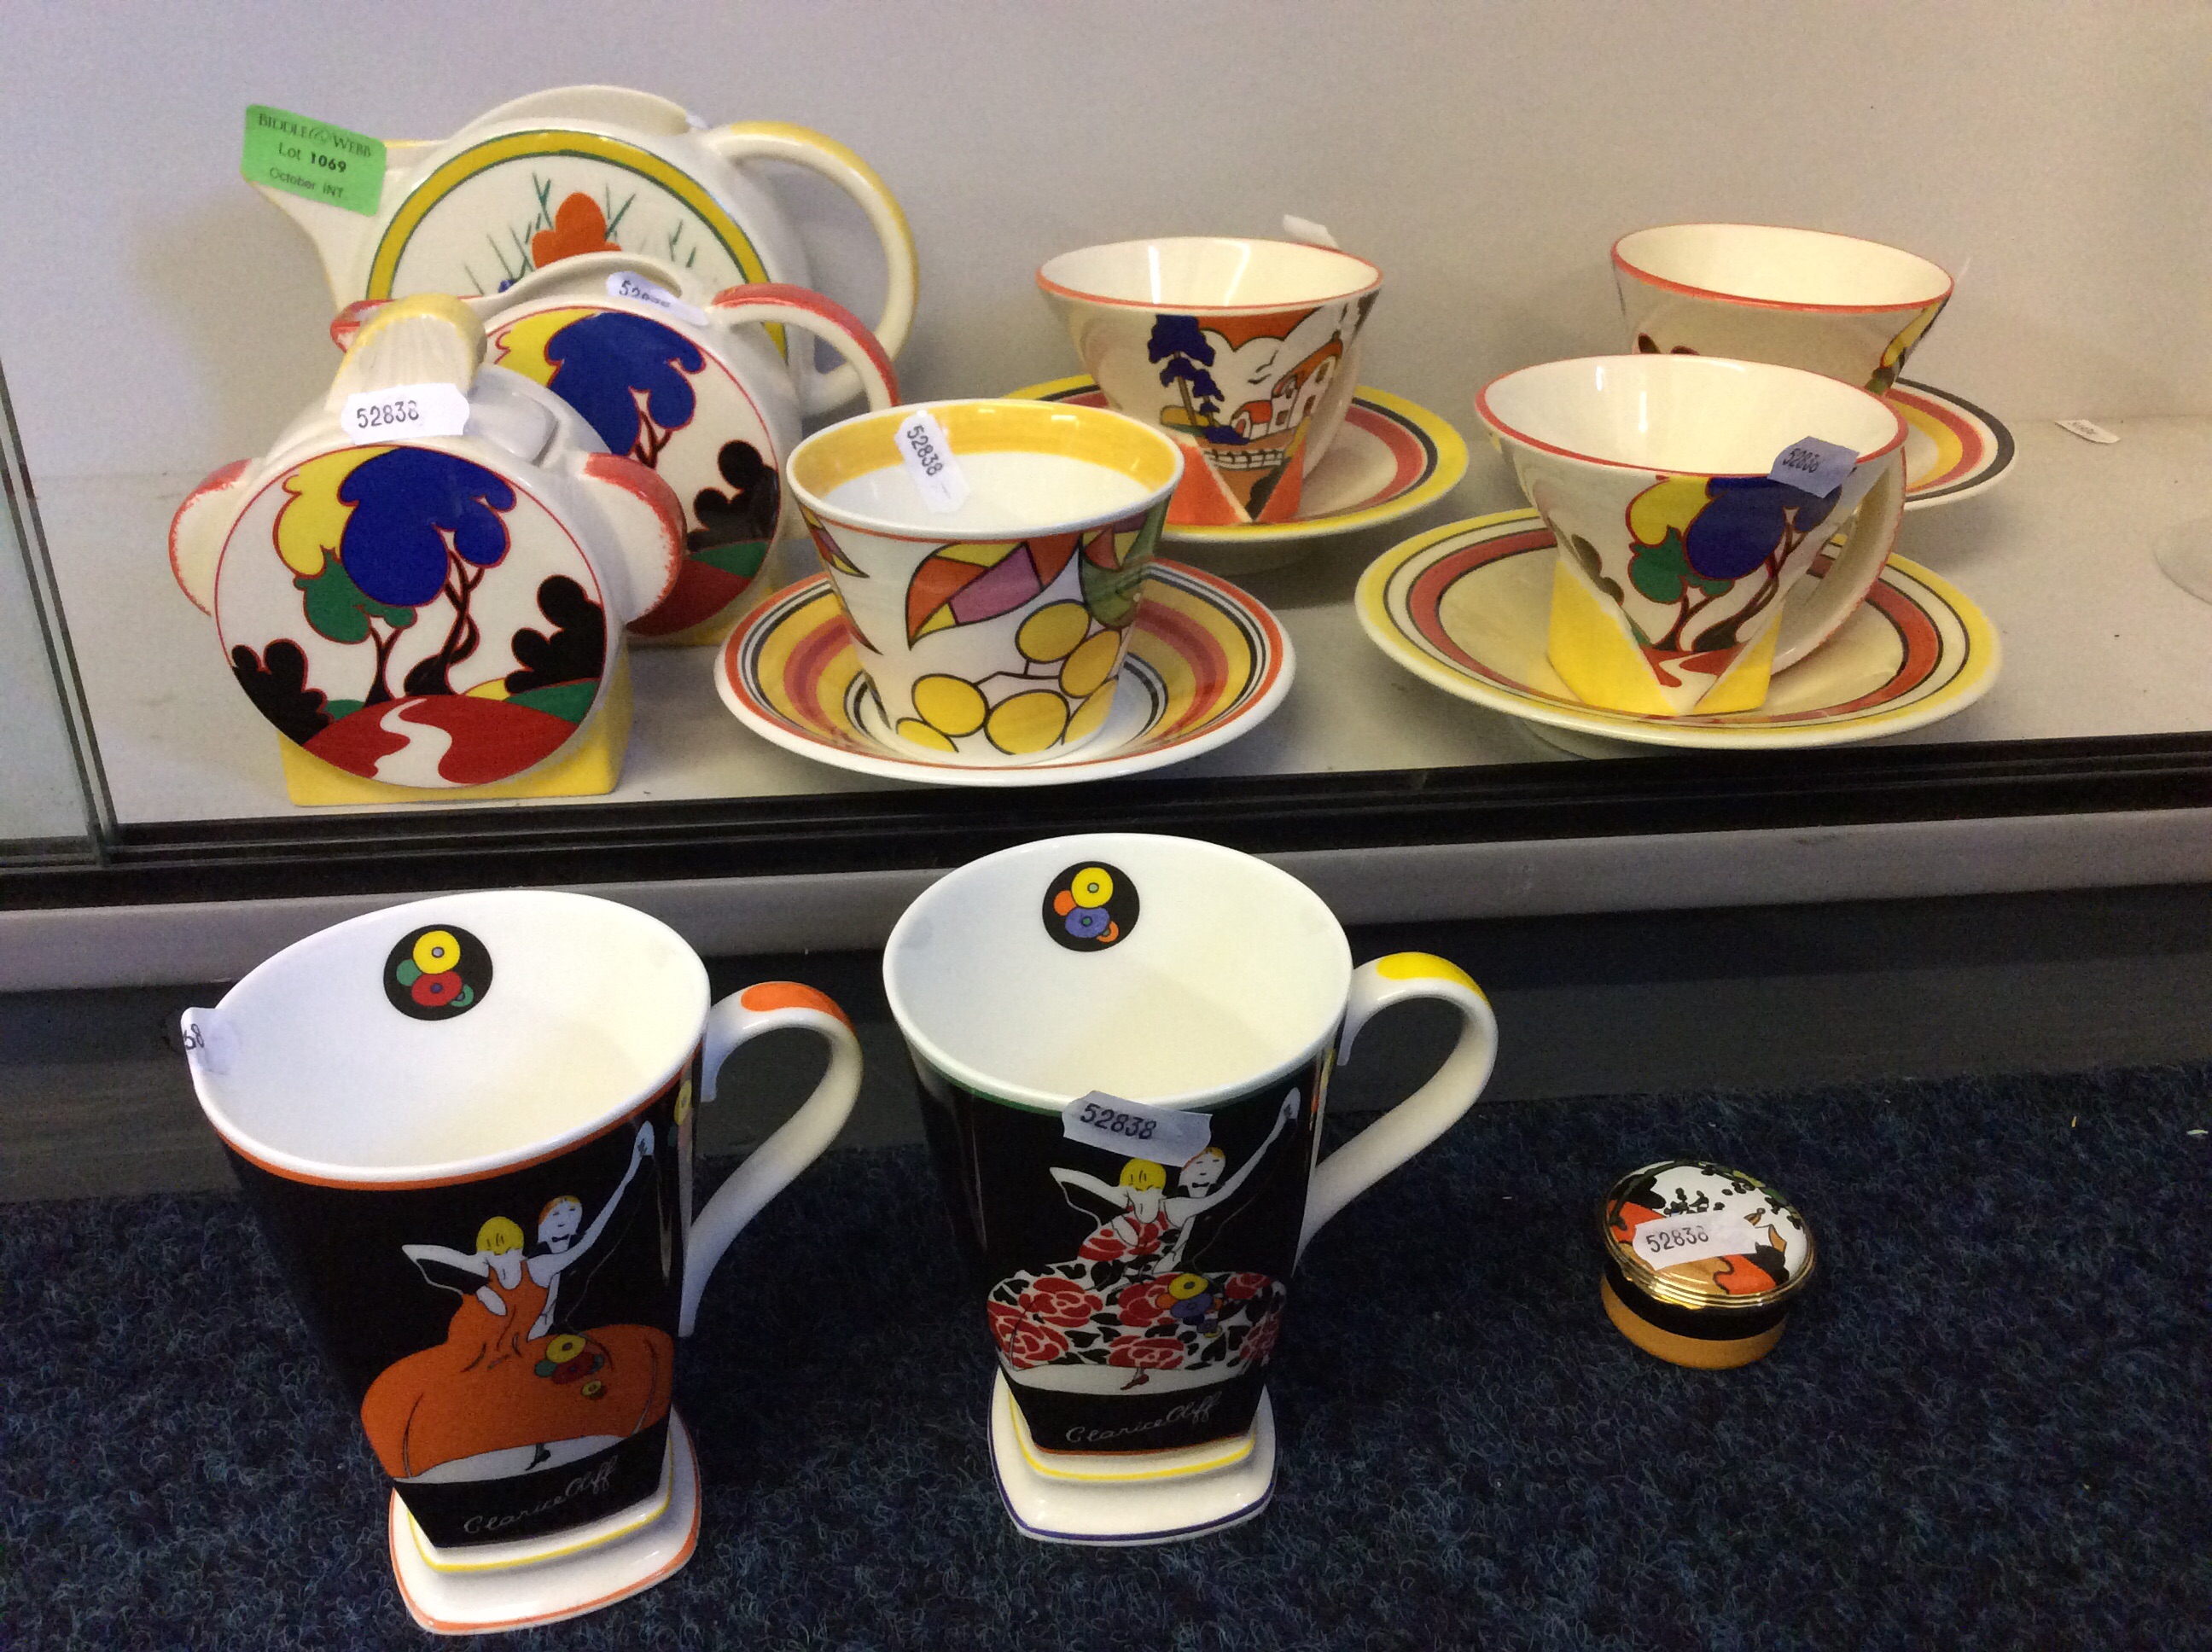 Two mugs, a set of four cups and saucers and a small box in the style of Clarice Cliff as well as